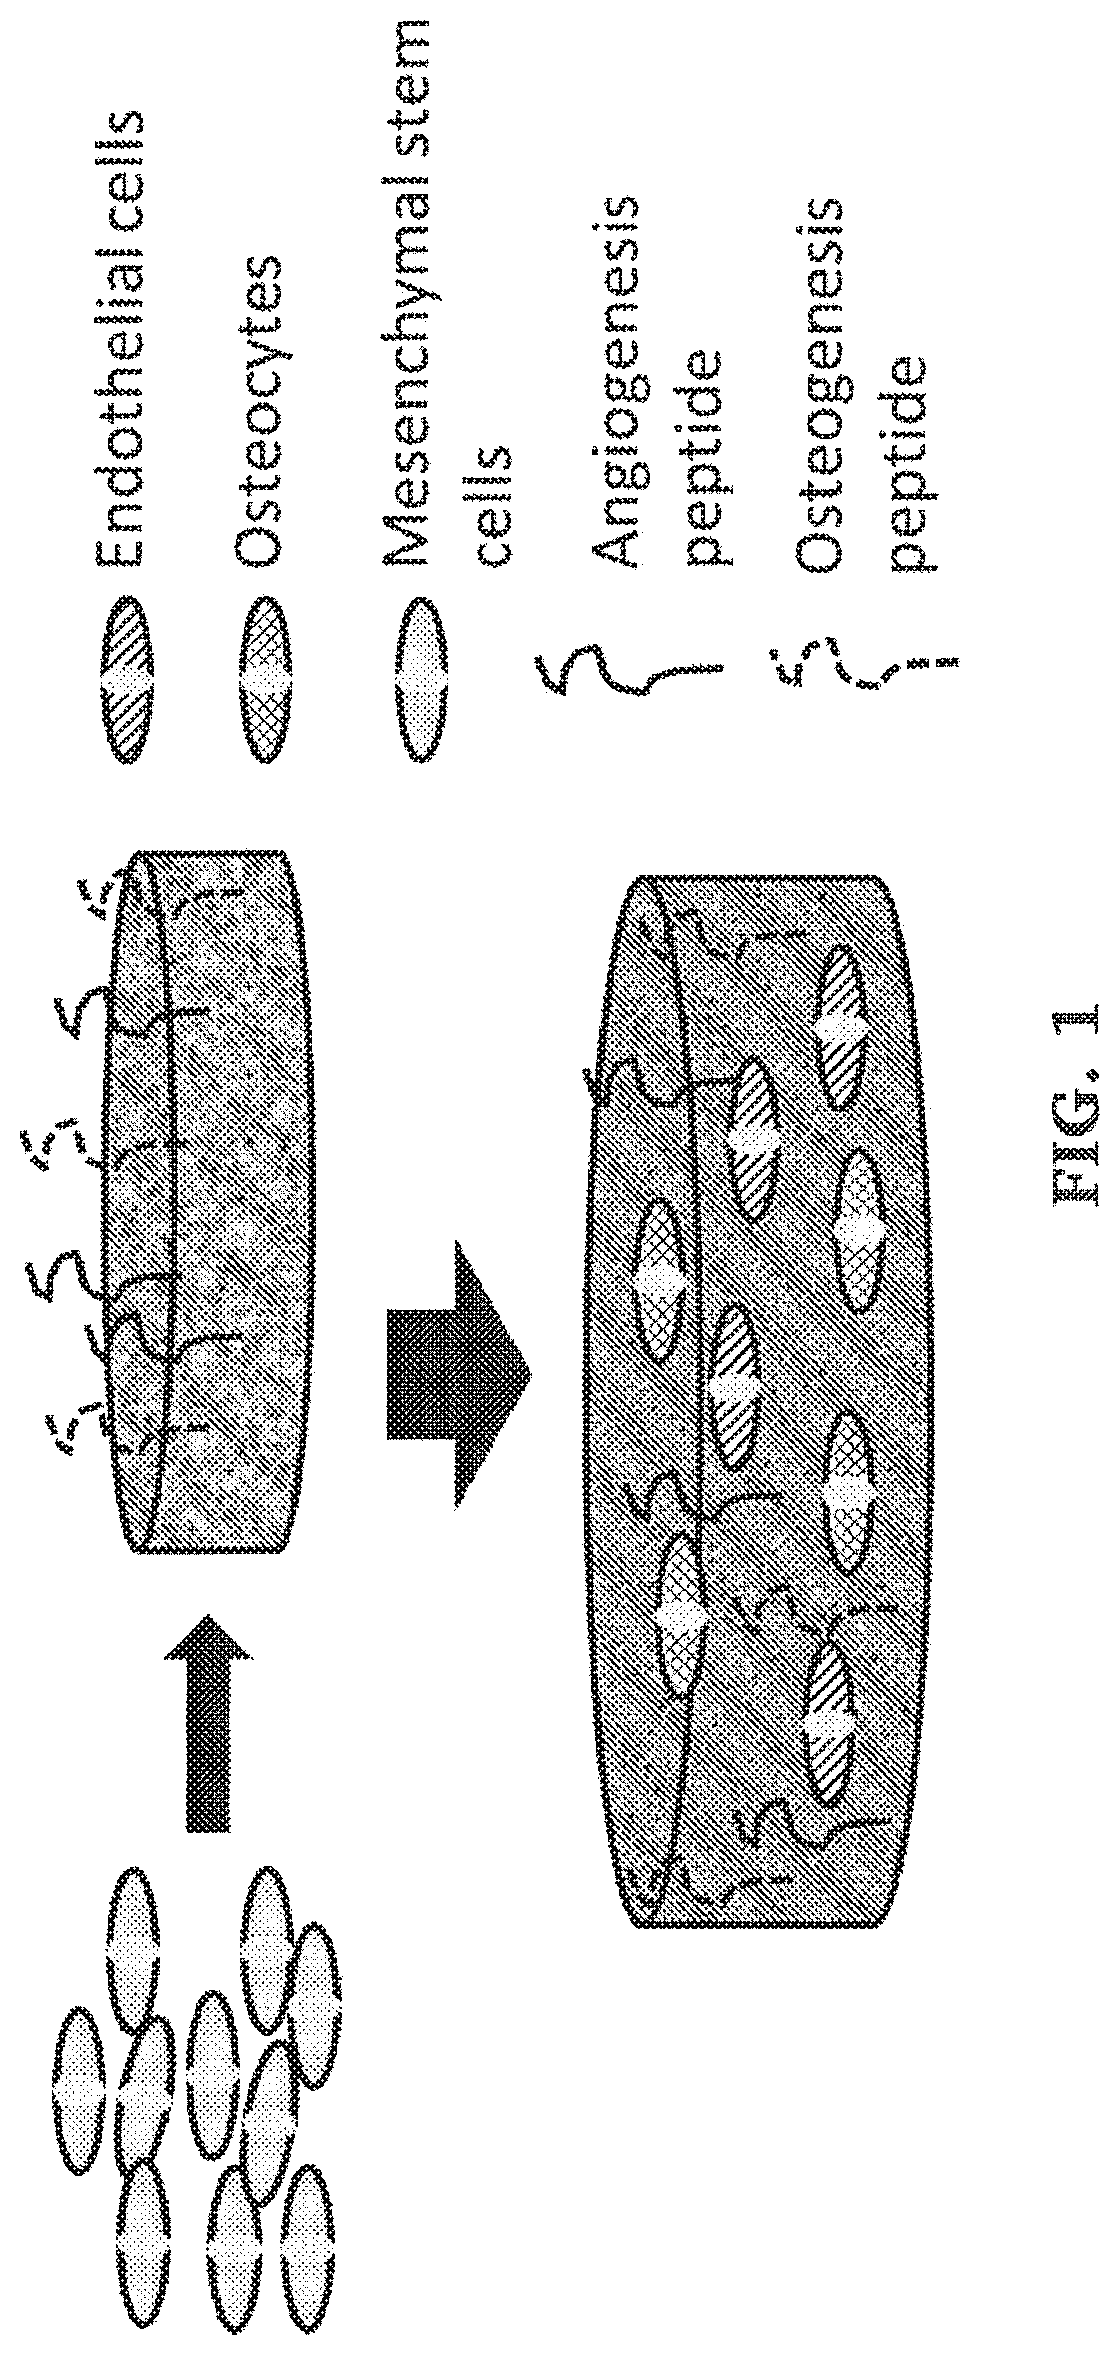 Post-3d printing functionalization of polymer scaffolds for enhanced bioactivity